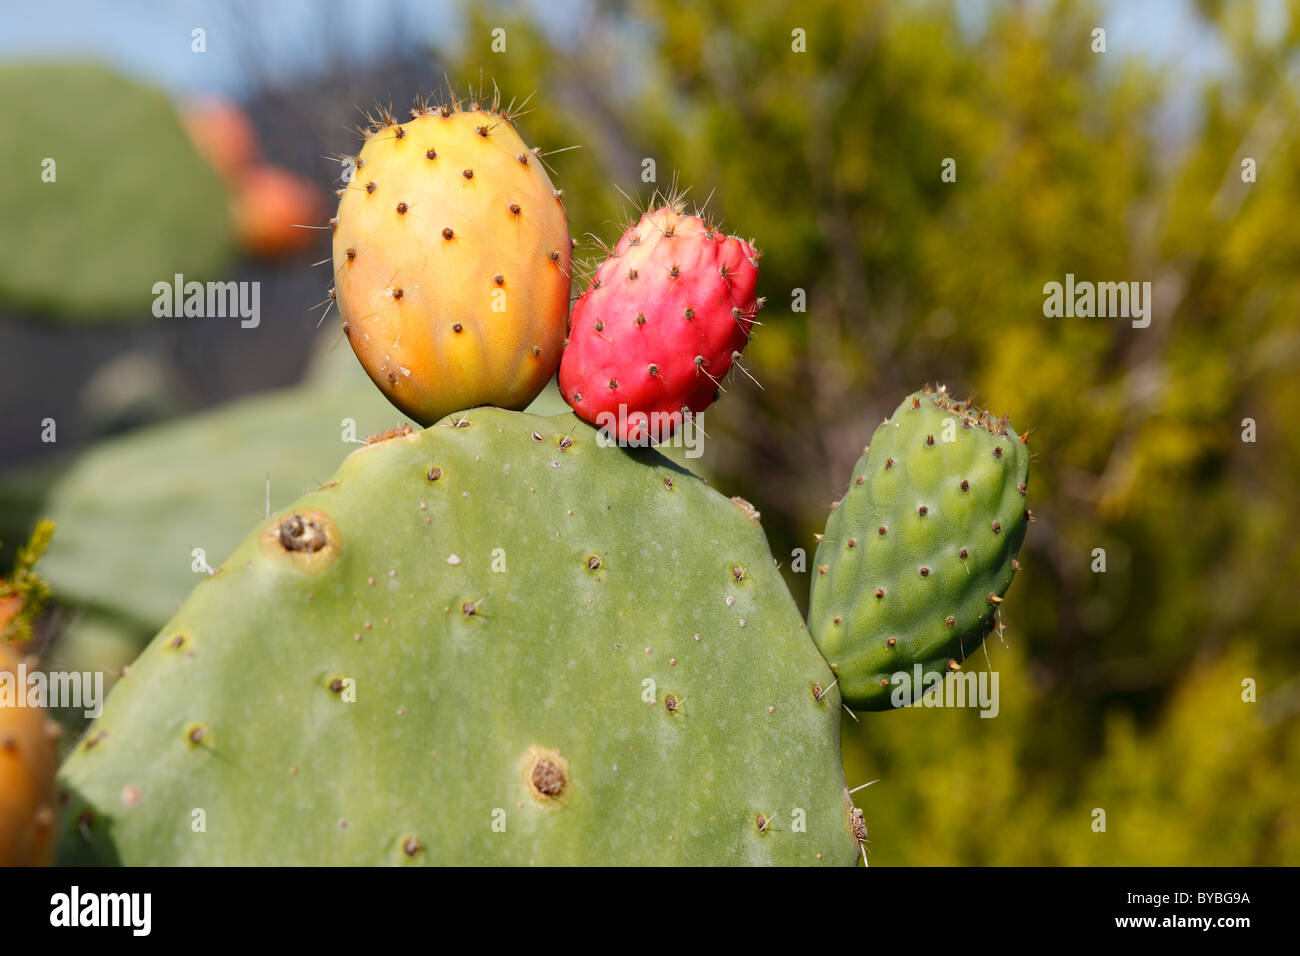 Fruits of red, yellow and green colour on a prickly pear cactus (Opuntia ficus-indica), La Gomera island, Canary Islands, Spain Stock Photo